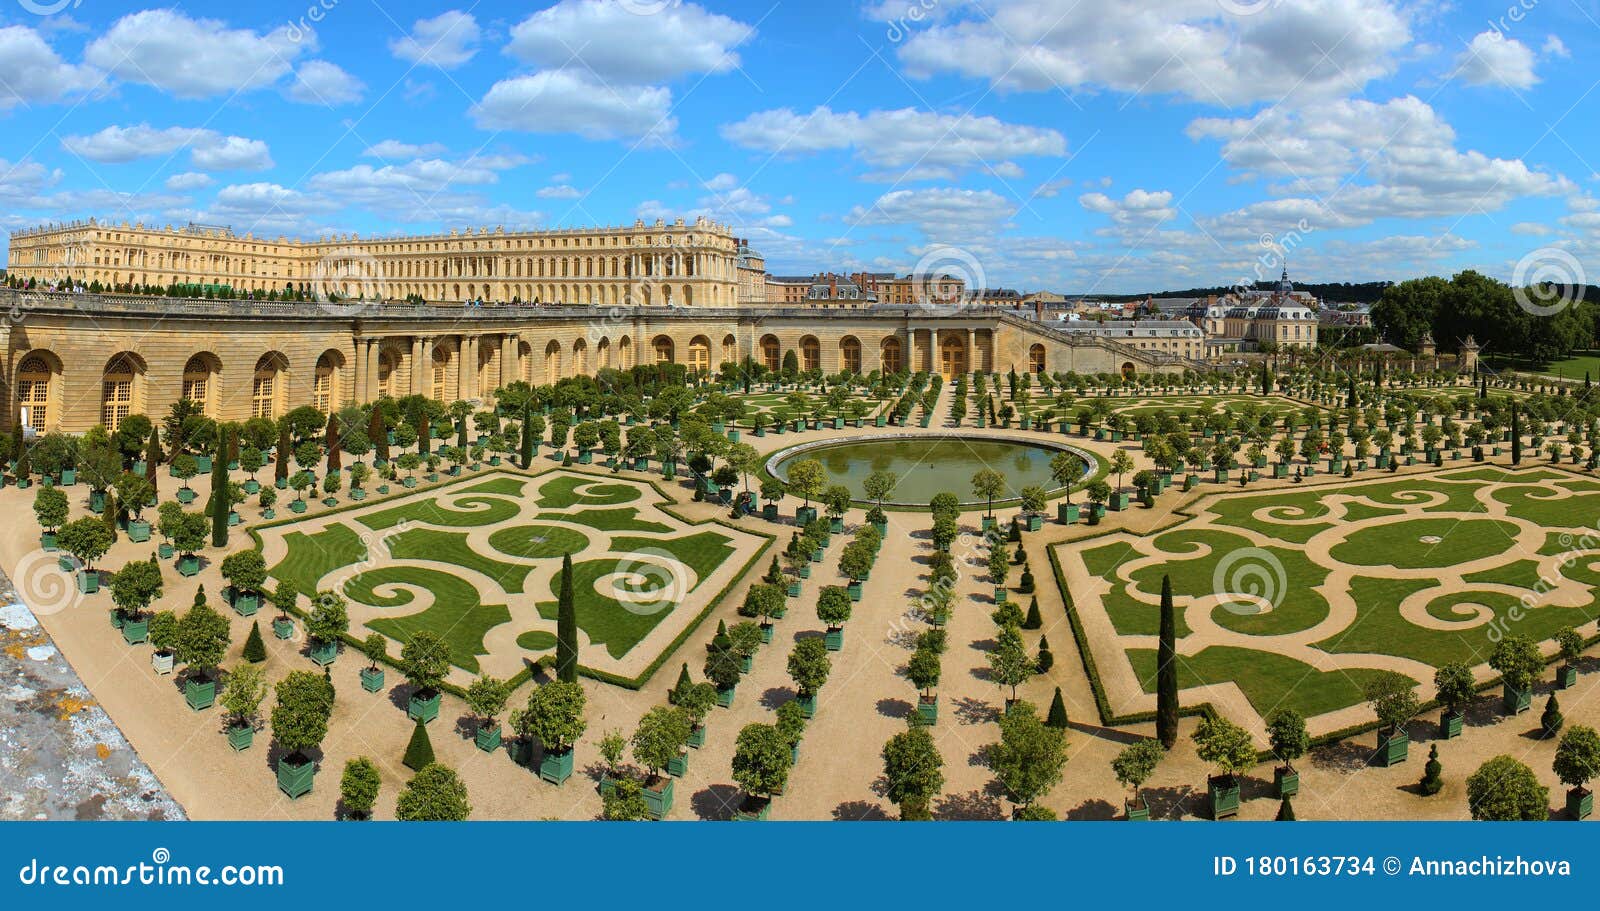 Versailles Palace Exterior Near Paris France This View Shows The Orangerie With Citrus Fruit Trees Stock Photo Image Of Famous Ancient